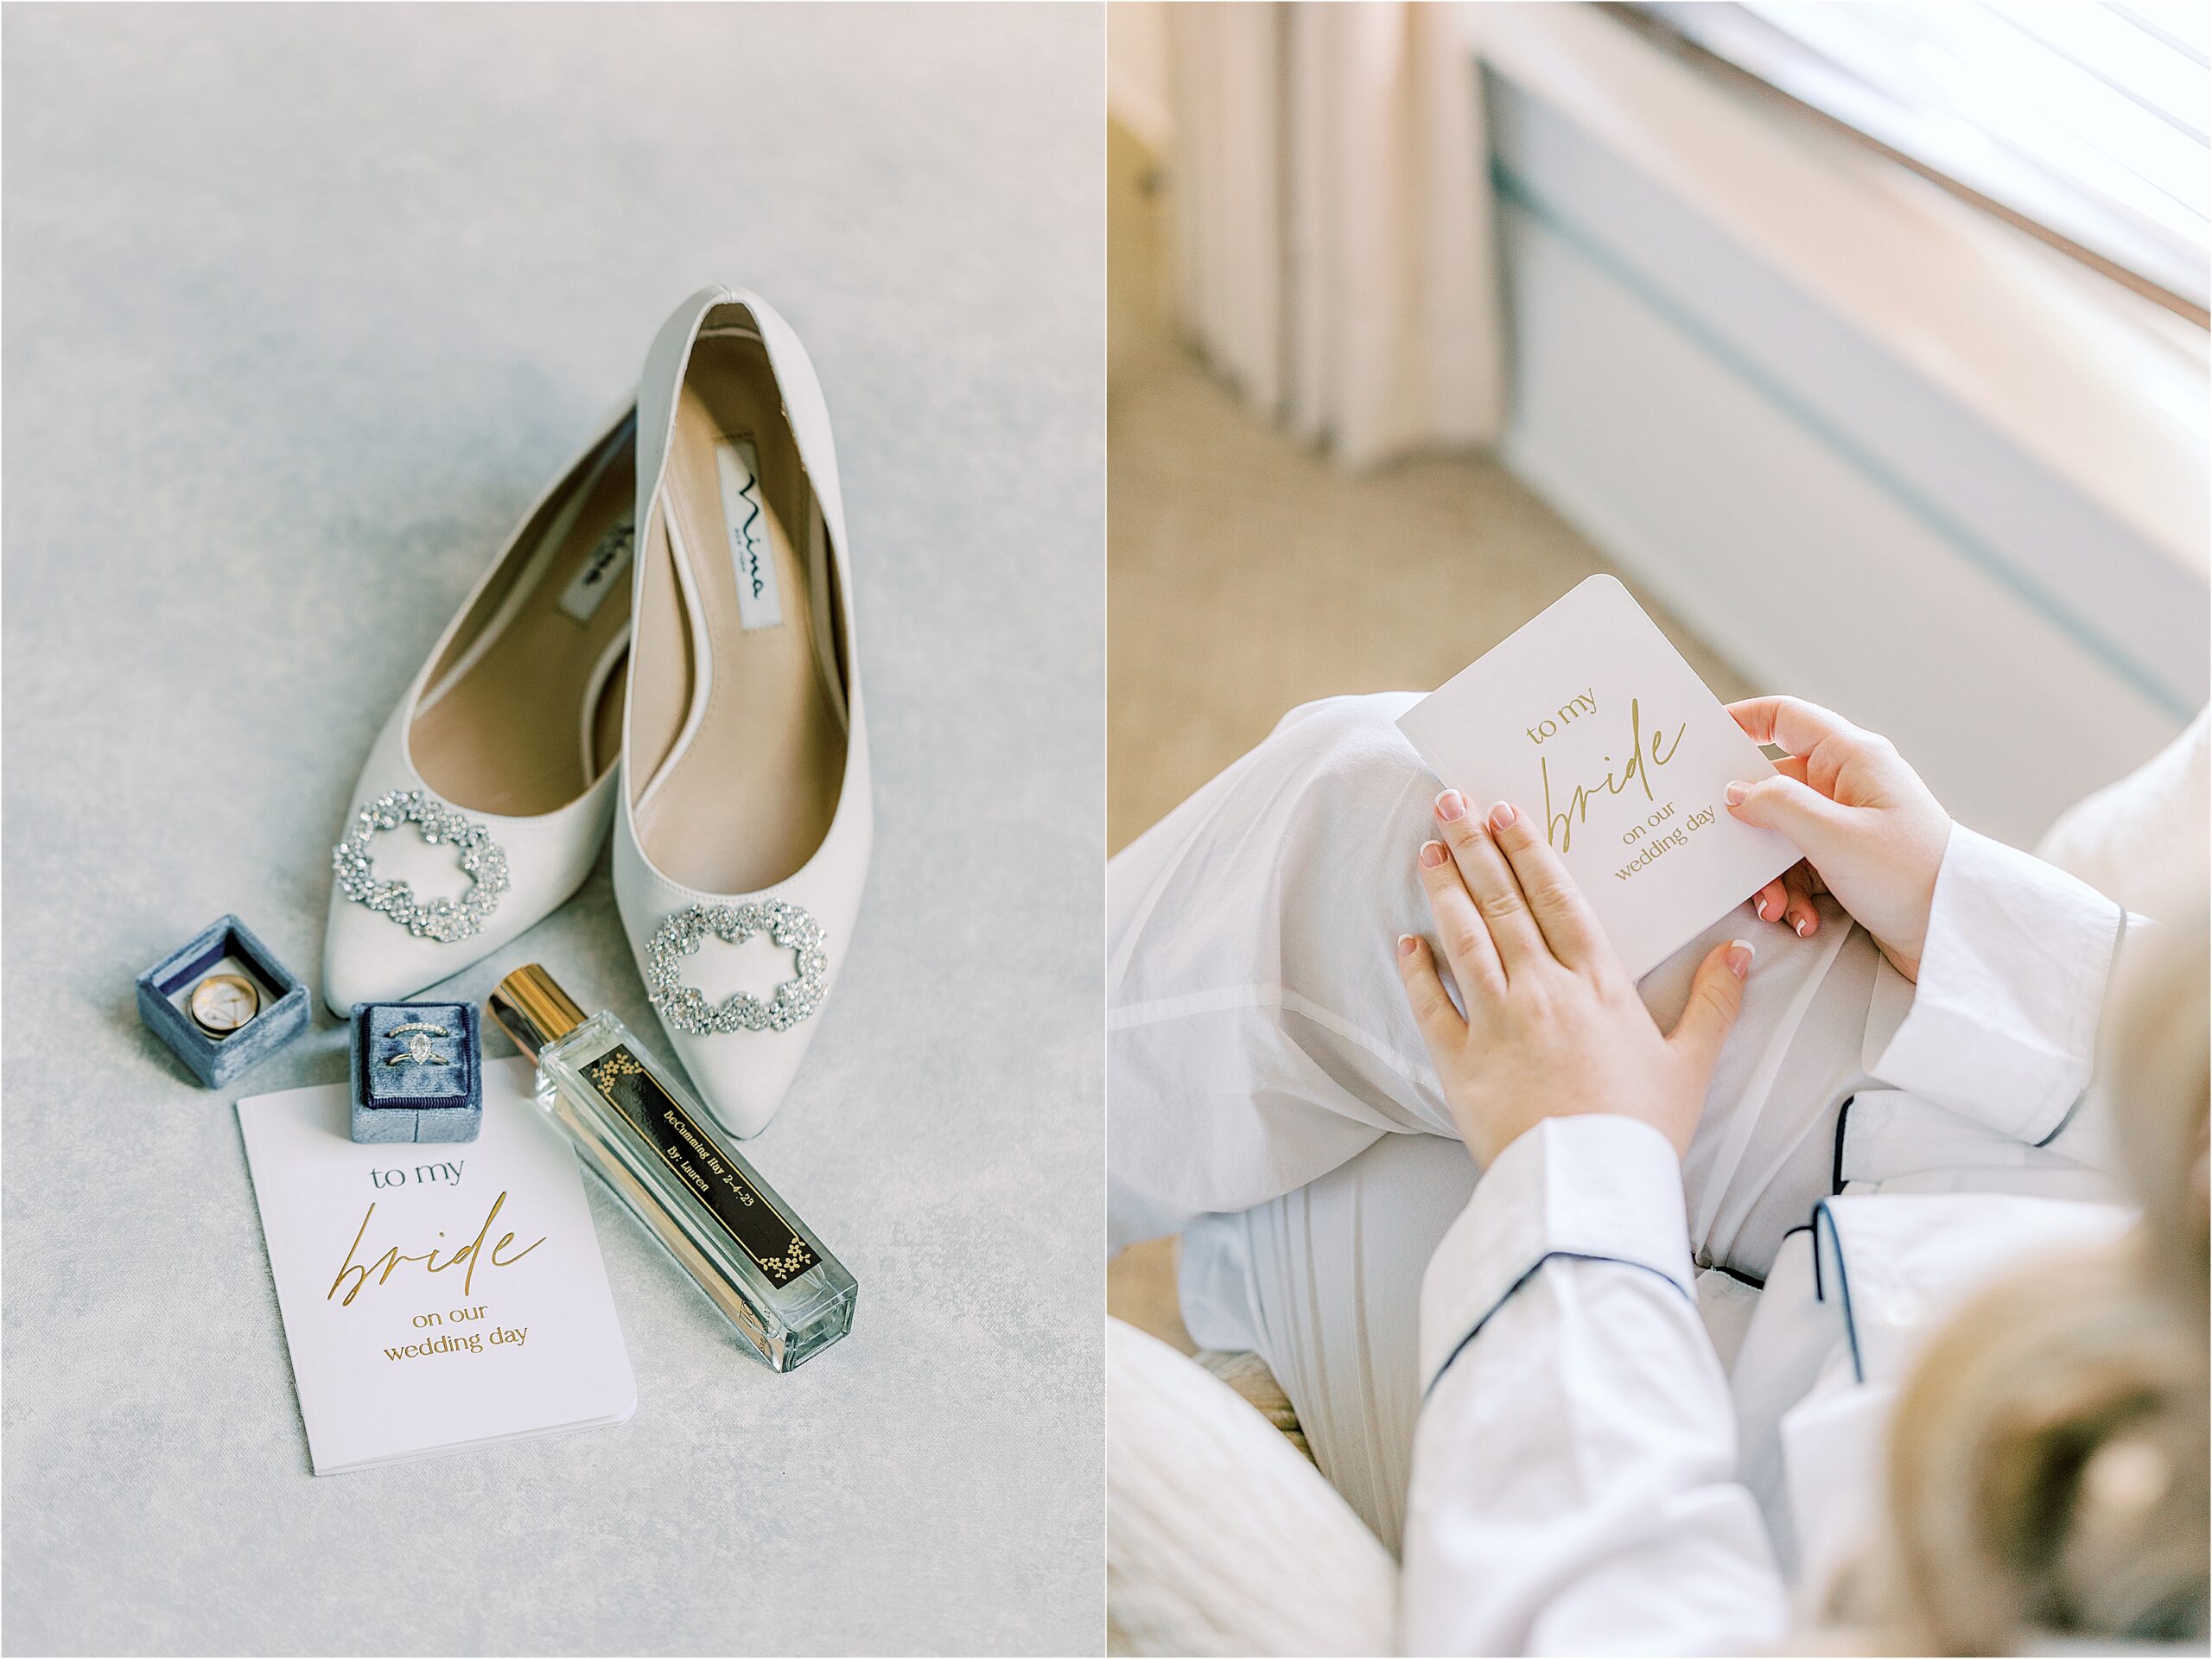 Satin wedding heels with crystal buckles on a blue backdrop, diamond ring in a blue ring box next to the perfume bottle.